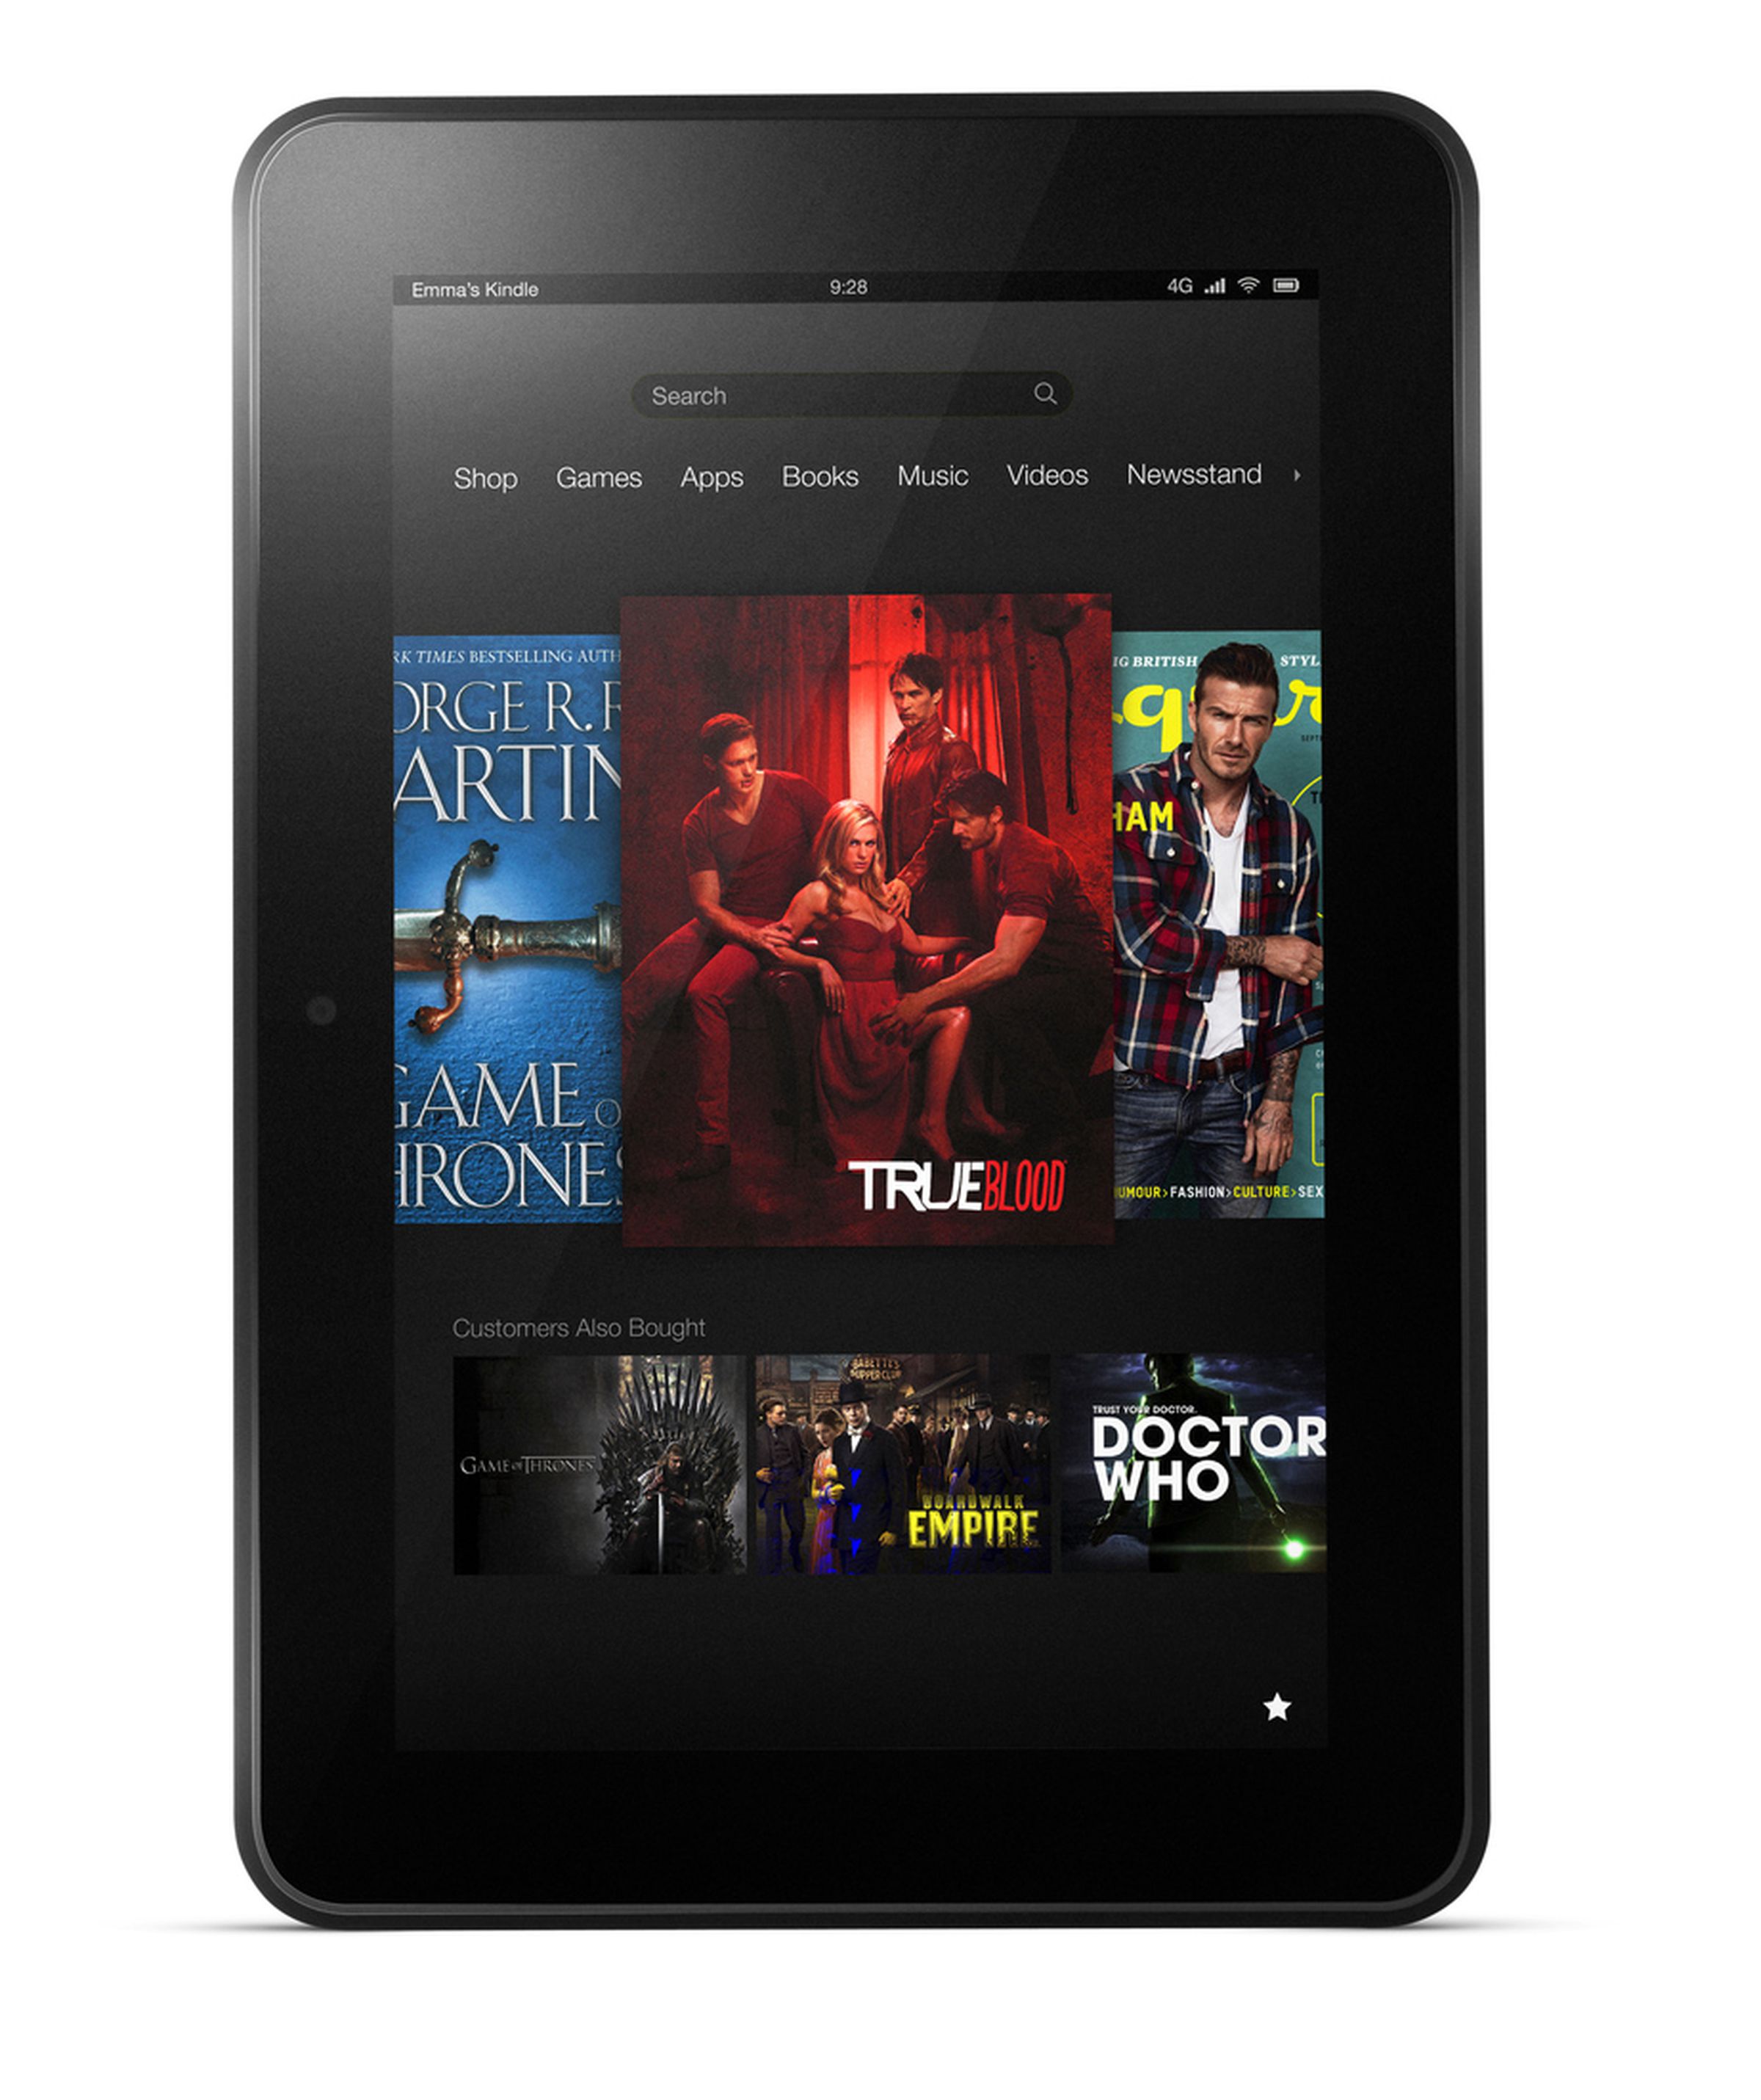 Amazon's new 8.9-inch Kindle Fire HD press images